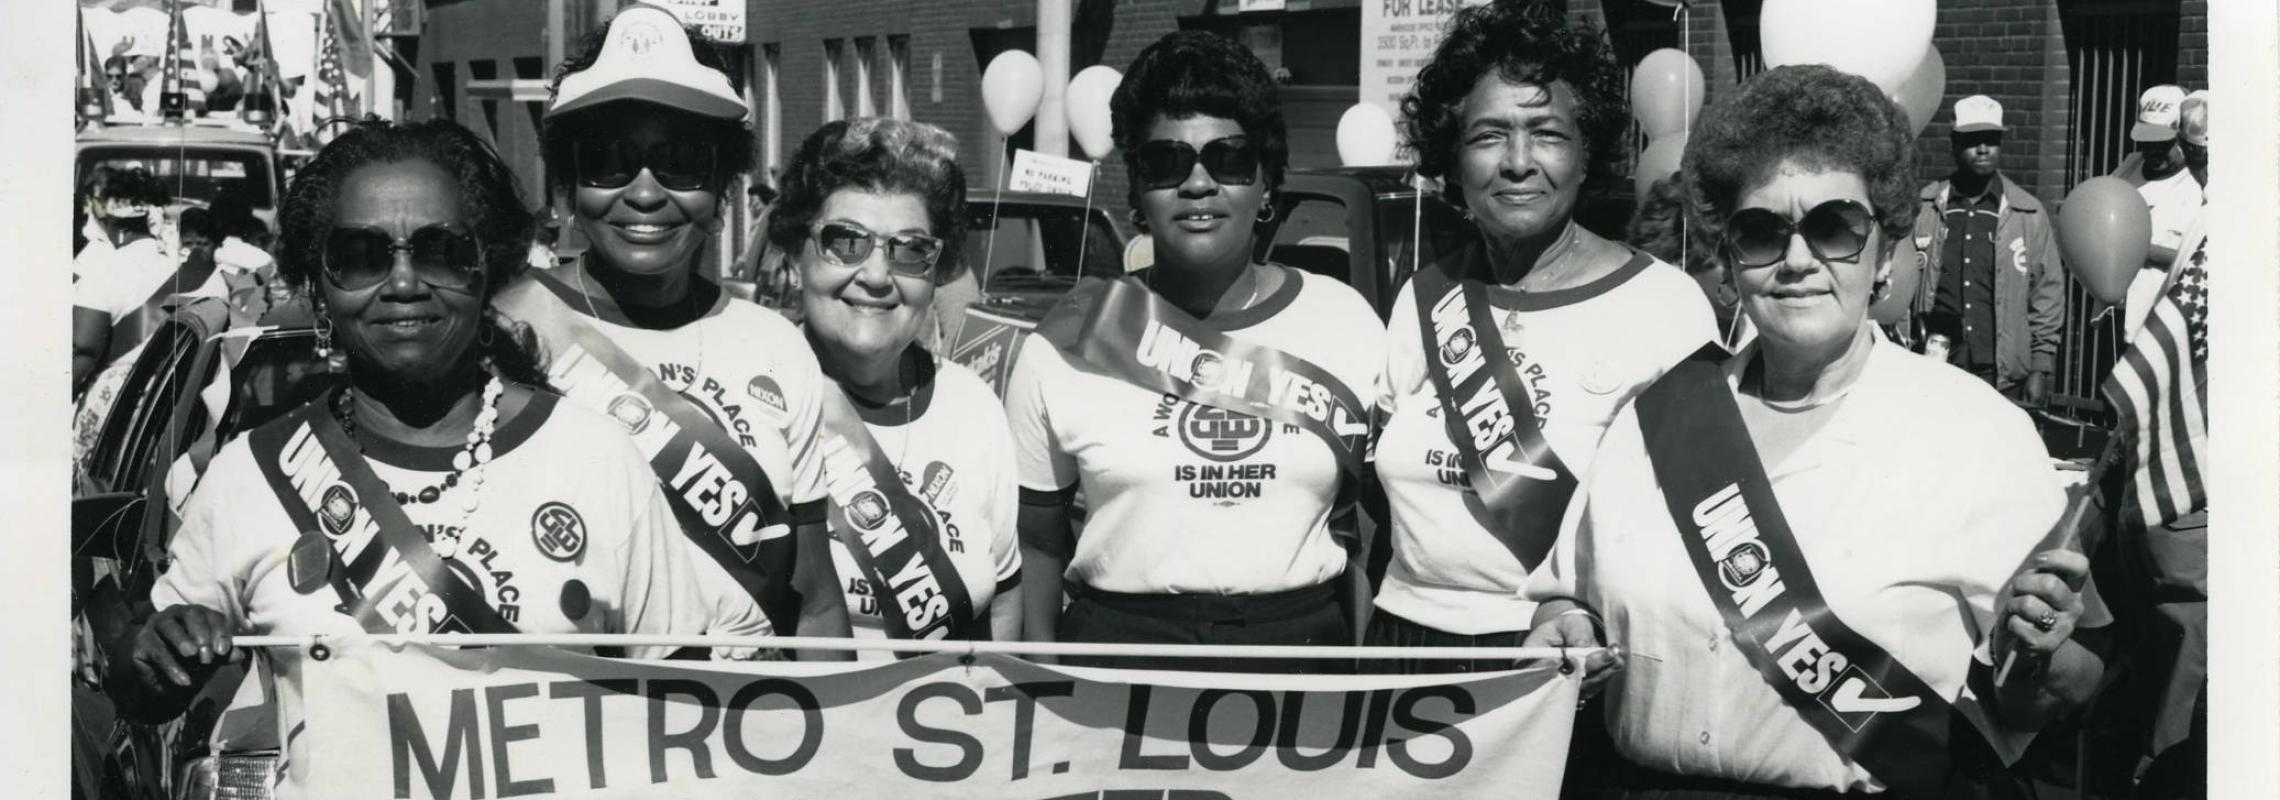 Coalition of Labor Union members at Labor Day Parade, 1988